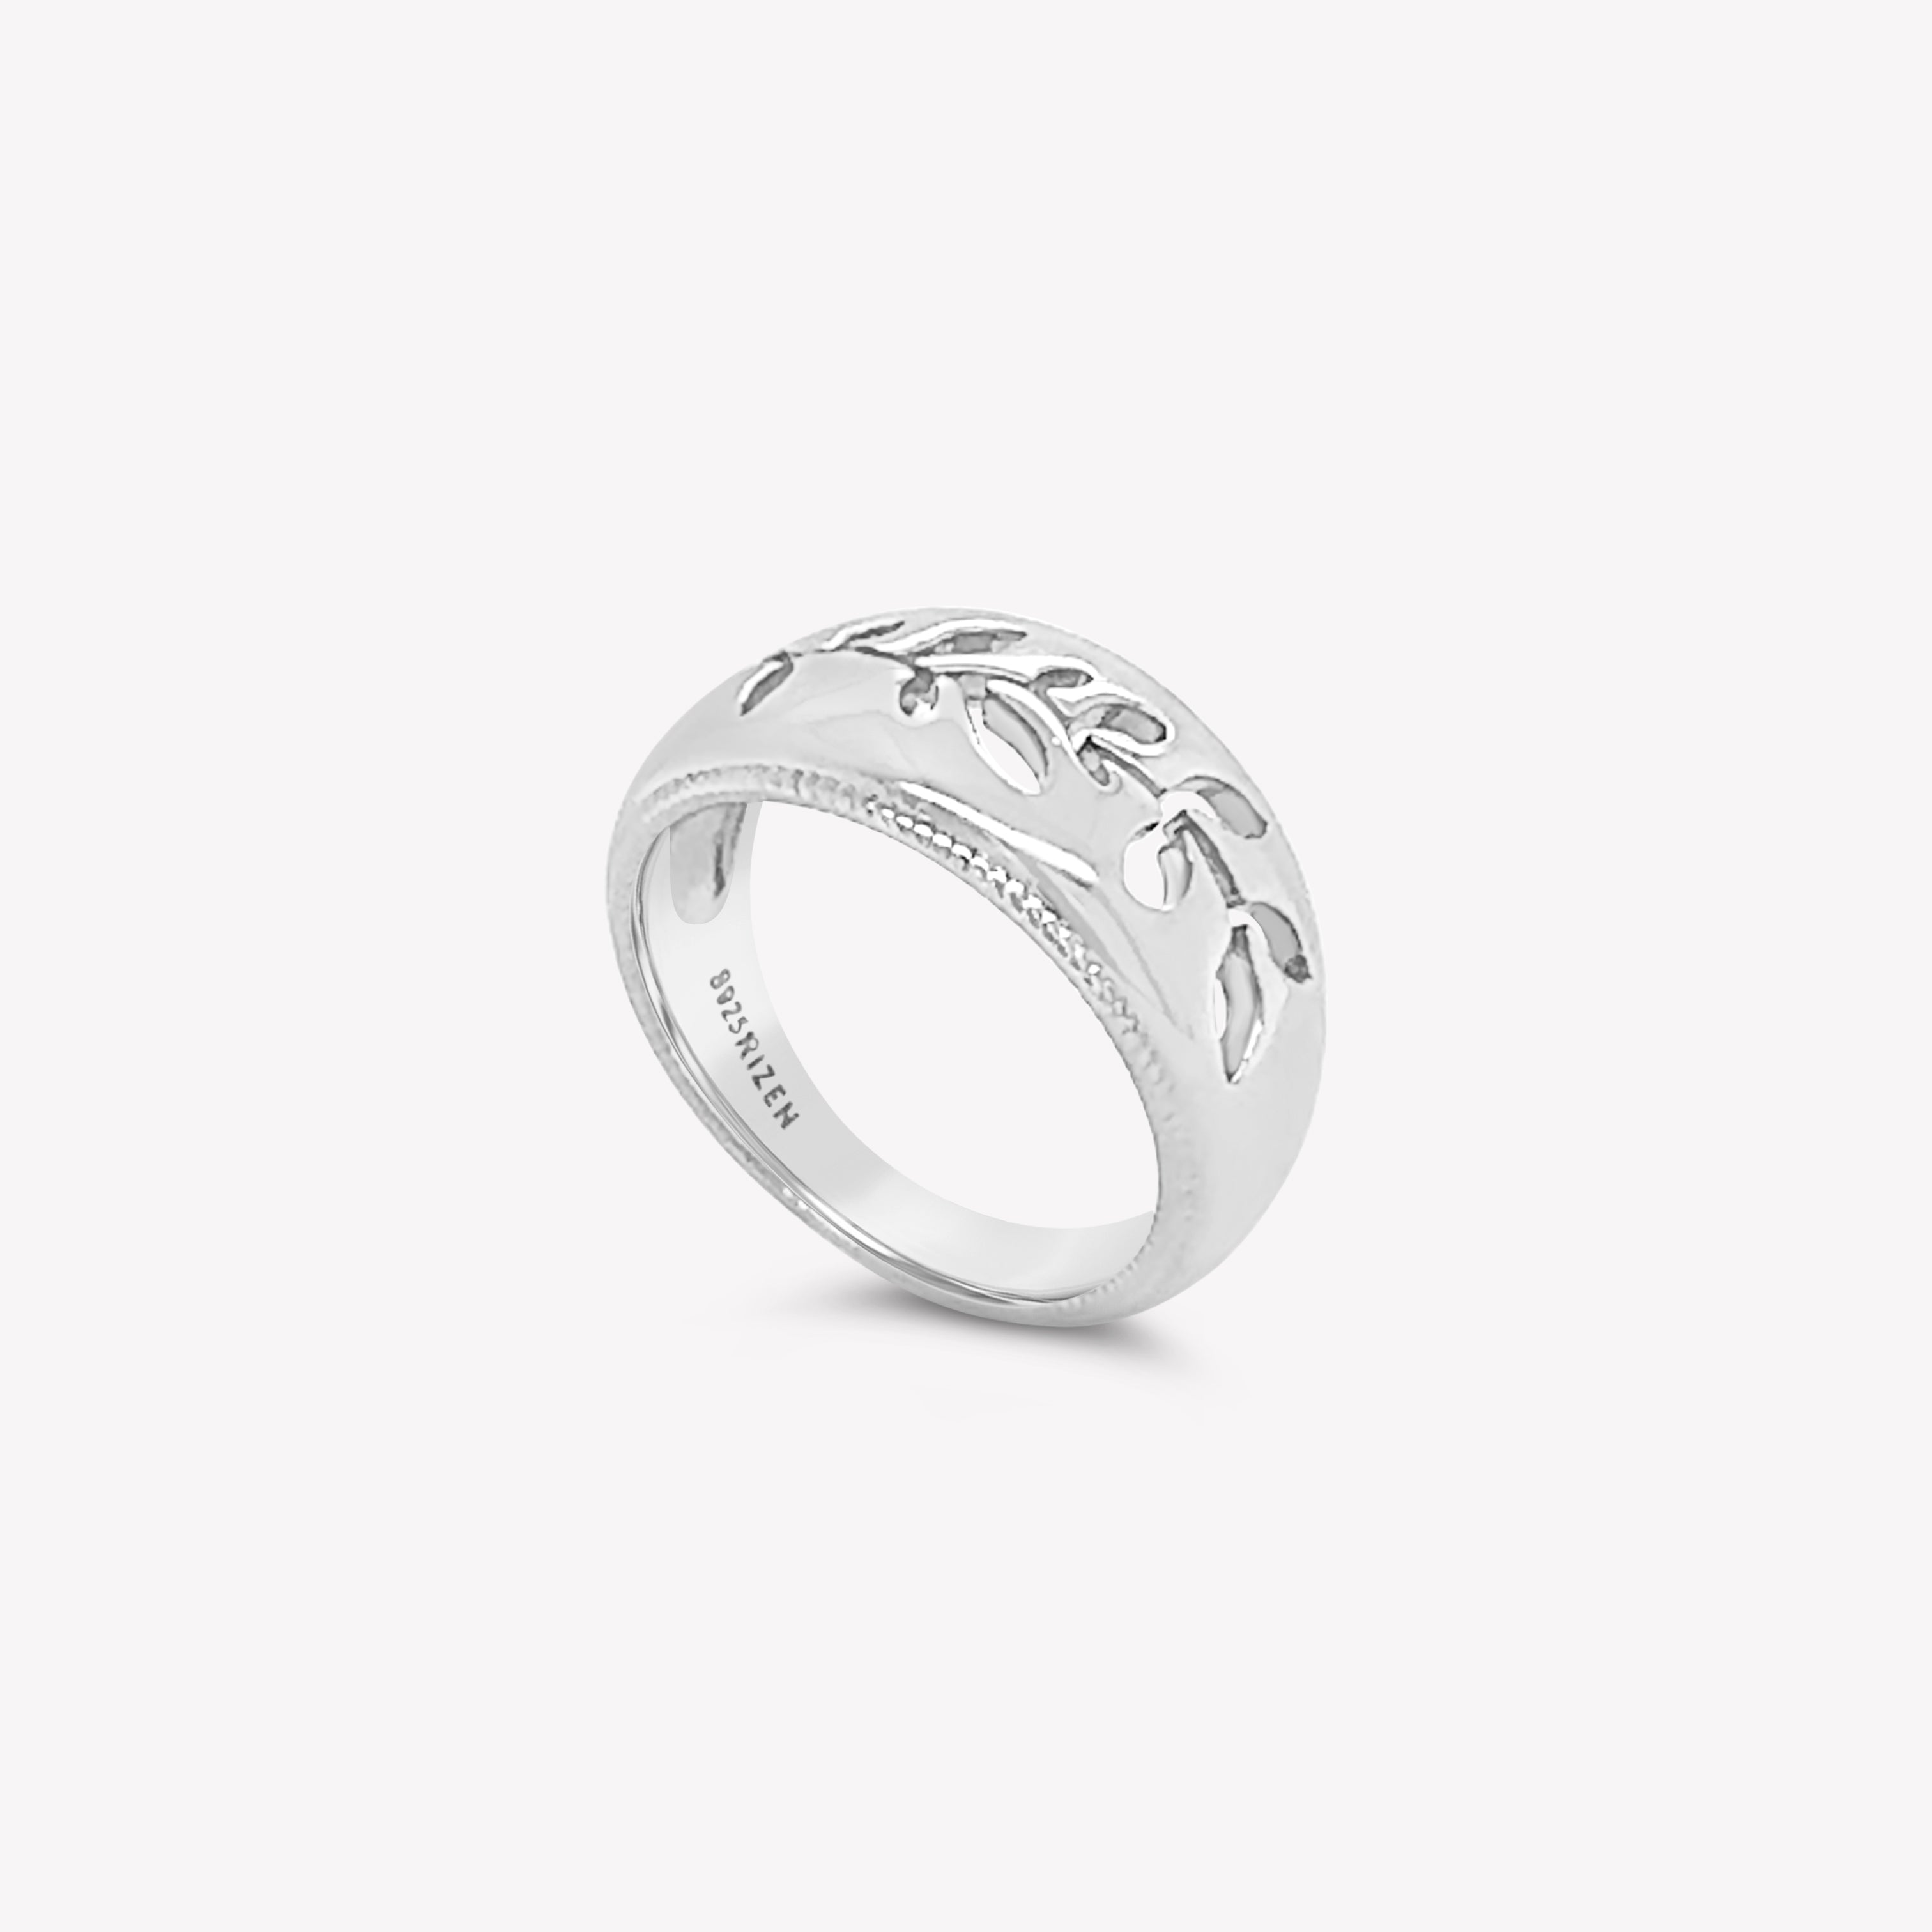 Intricately designed Olive Branch Ring in sterling silver from the Rooted Collection by Rizen Jewelry.